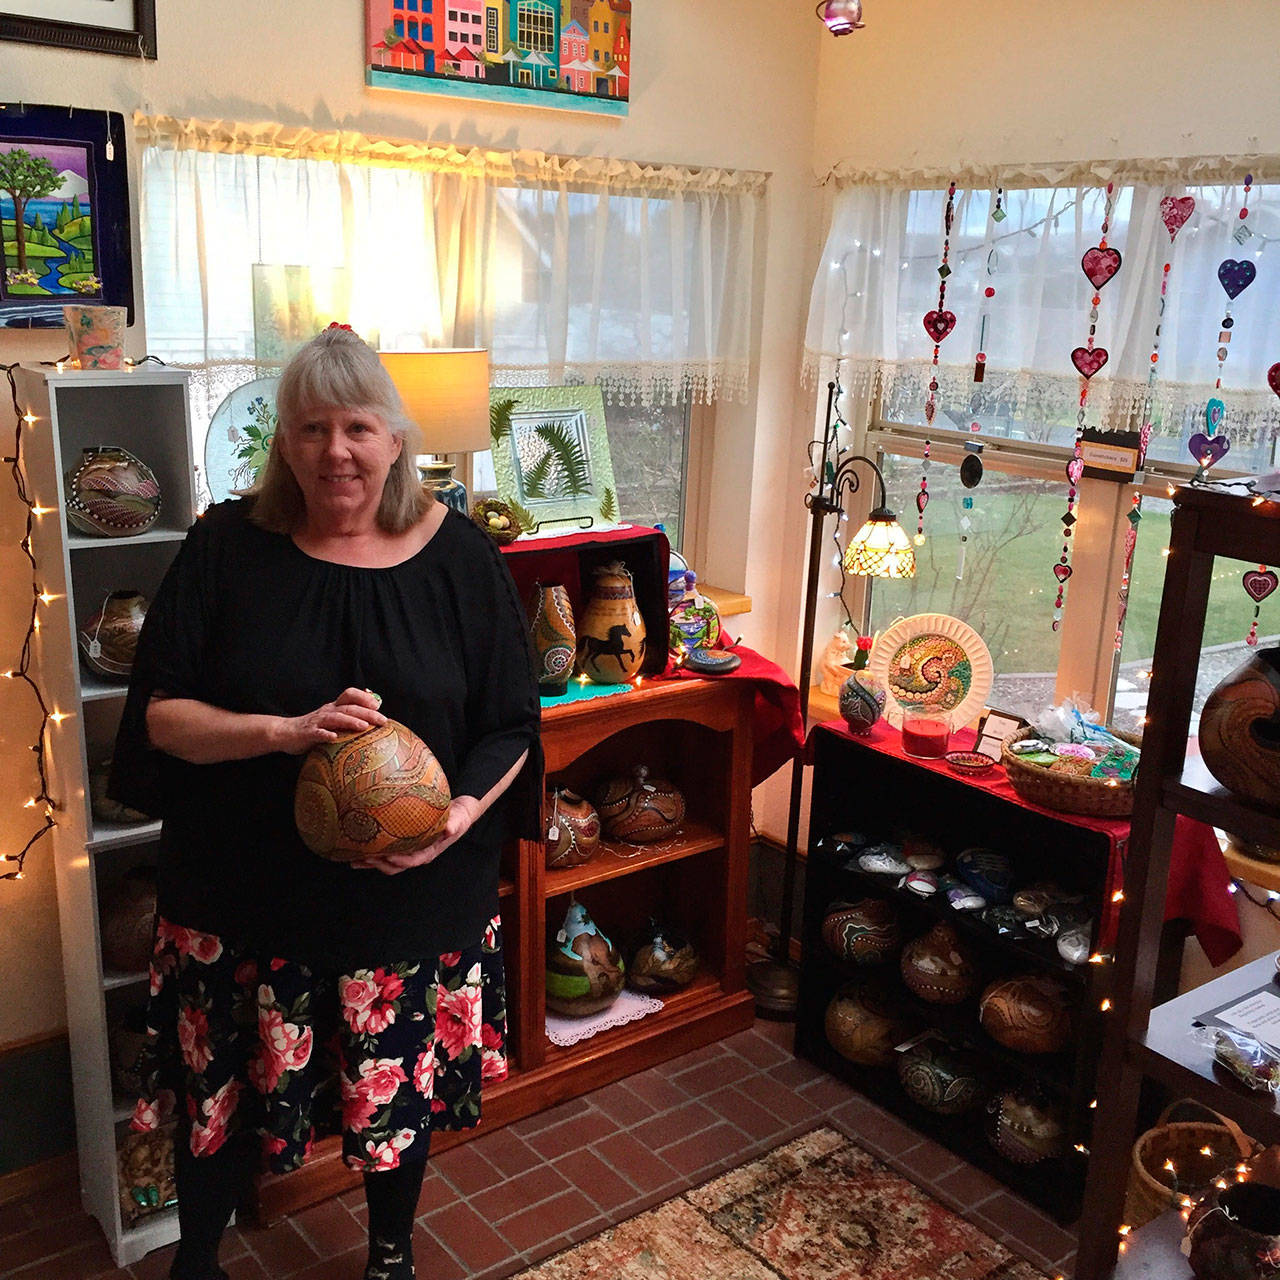 Chawn Vance’s art can be seen at The Tangled Gourd during the Sequim First Friday Art Walk.